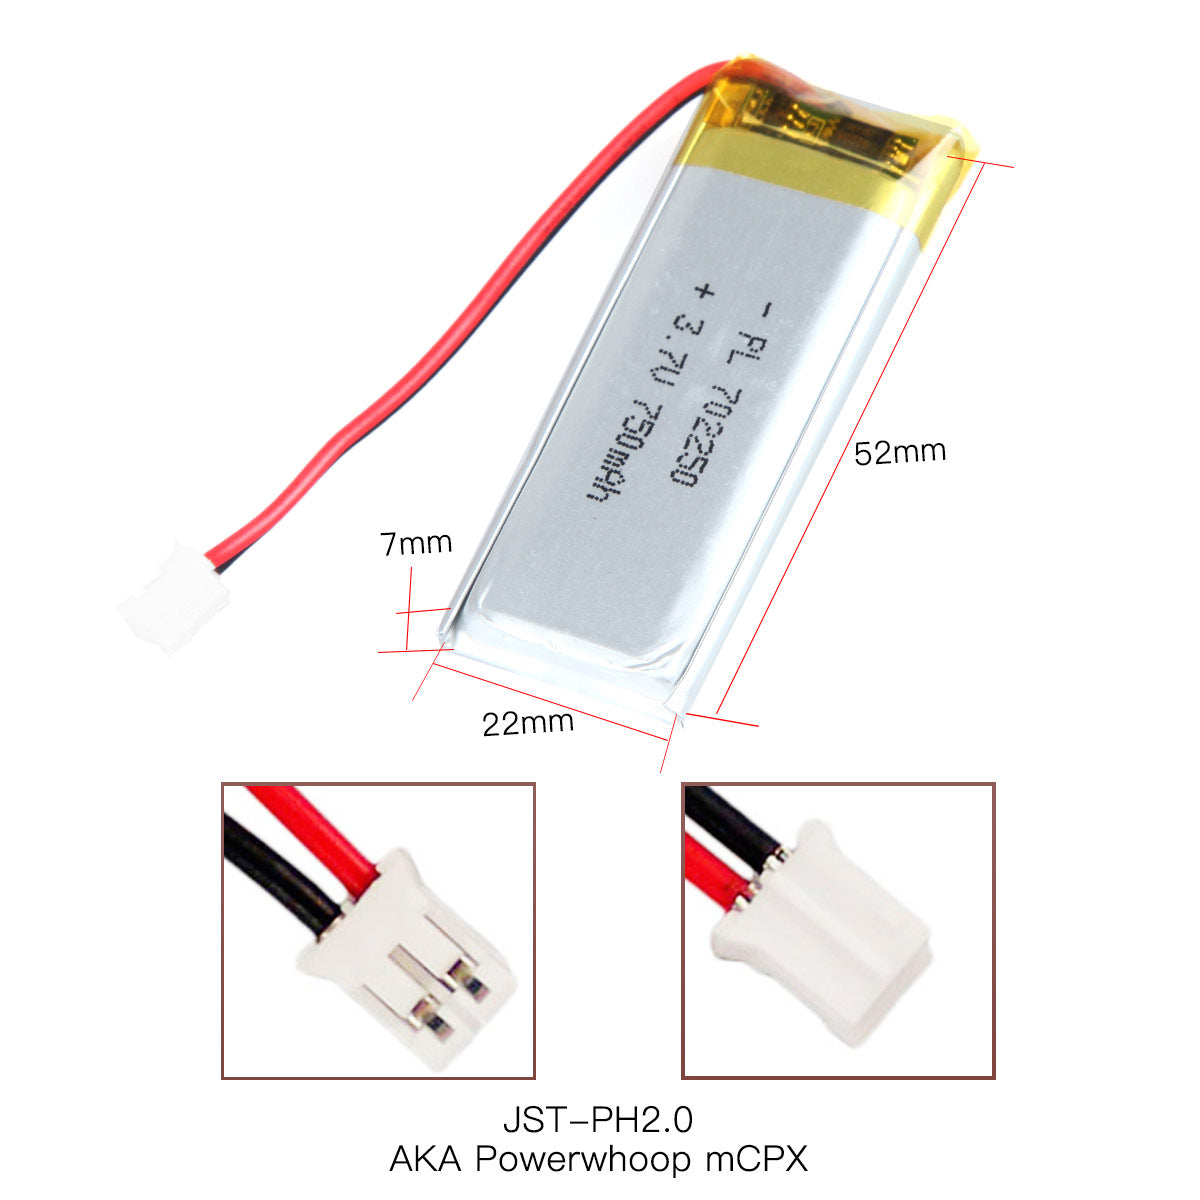 YDL 3.7V 750mAh 702250 Rechargeable Lipo Battery with JST Connector - YDL Battery